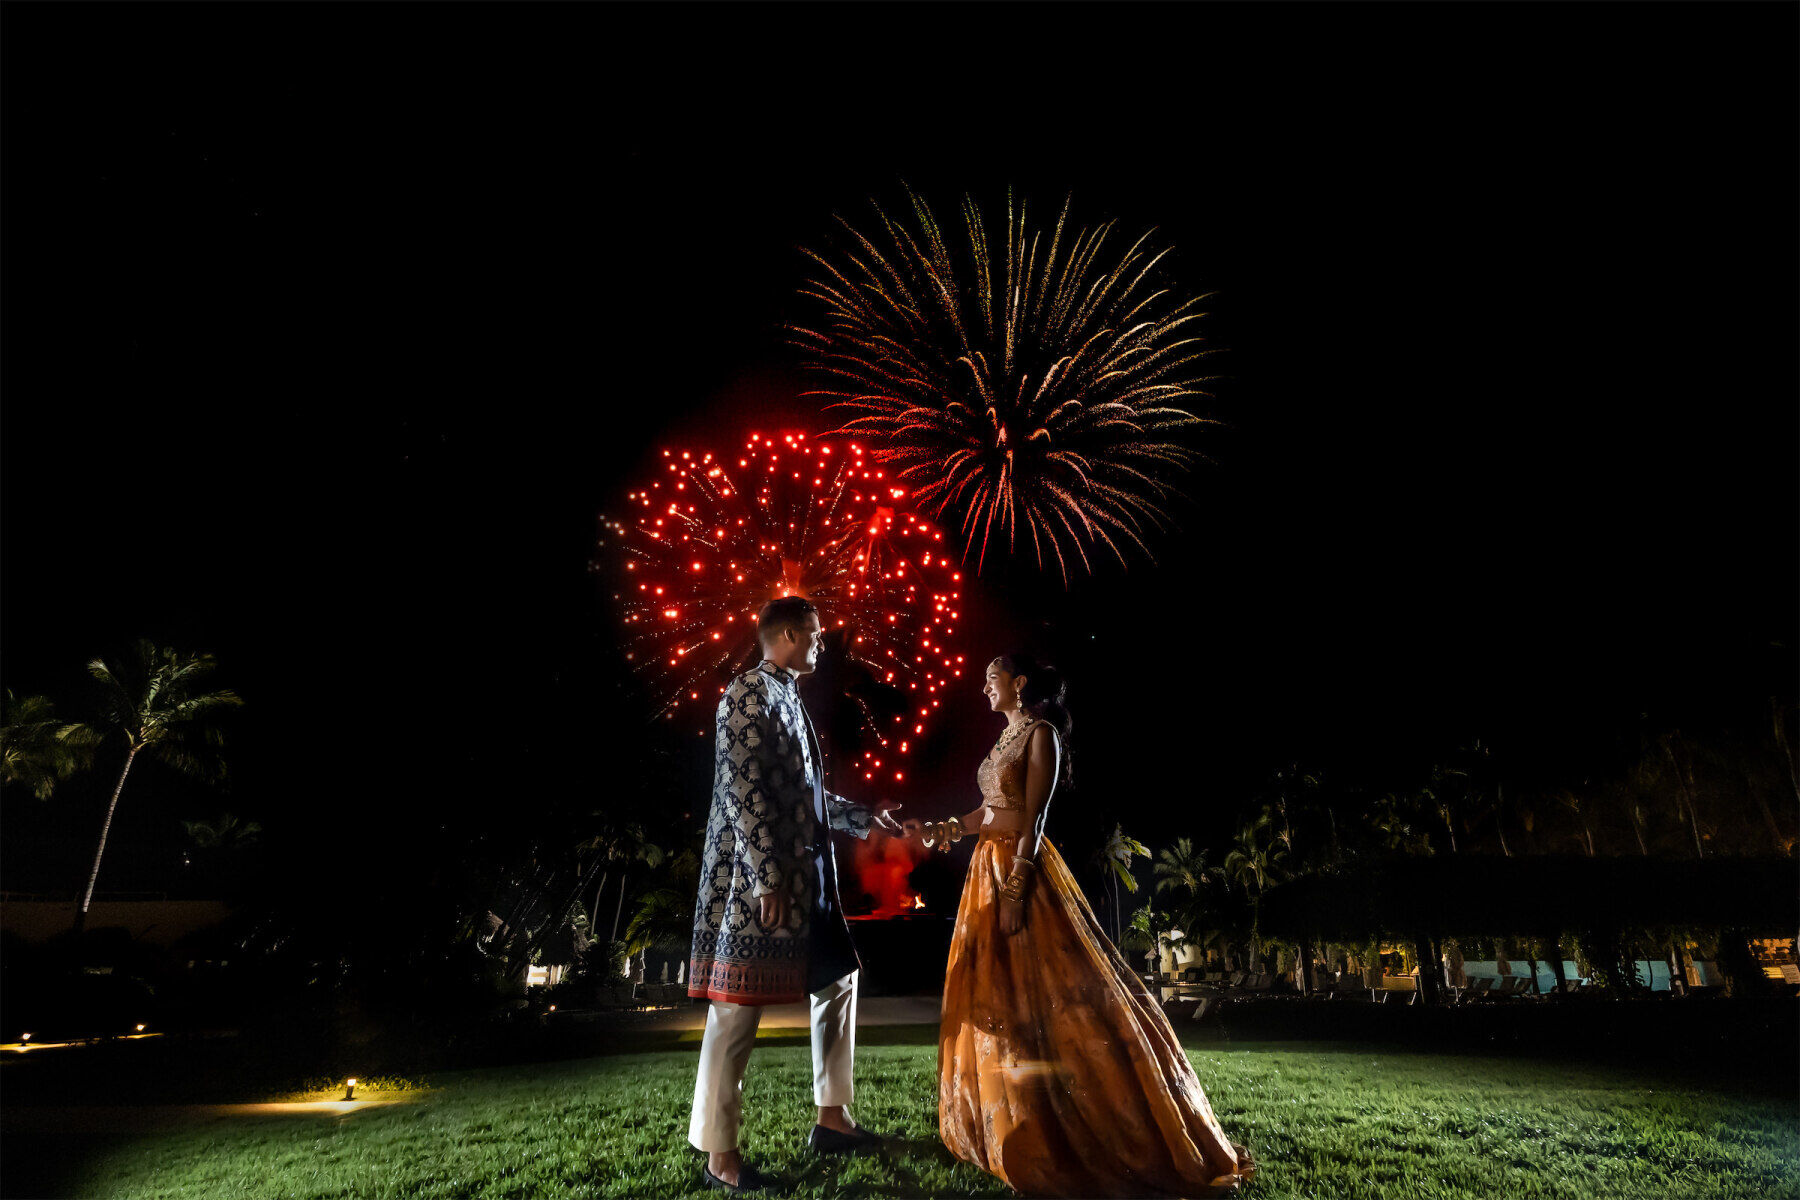 Wedding Fireworks Wedding Sparklers: A bride and groom smiling at each other while fireworks go off in the background.